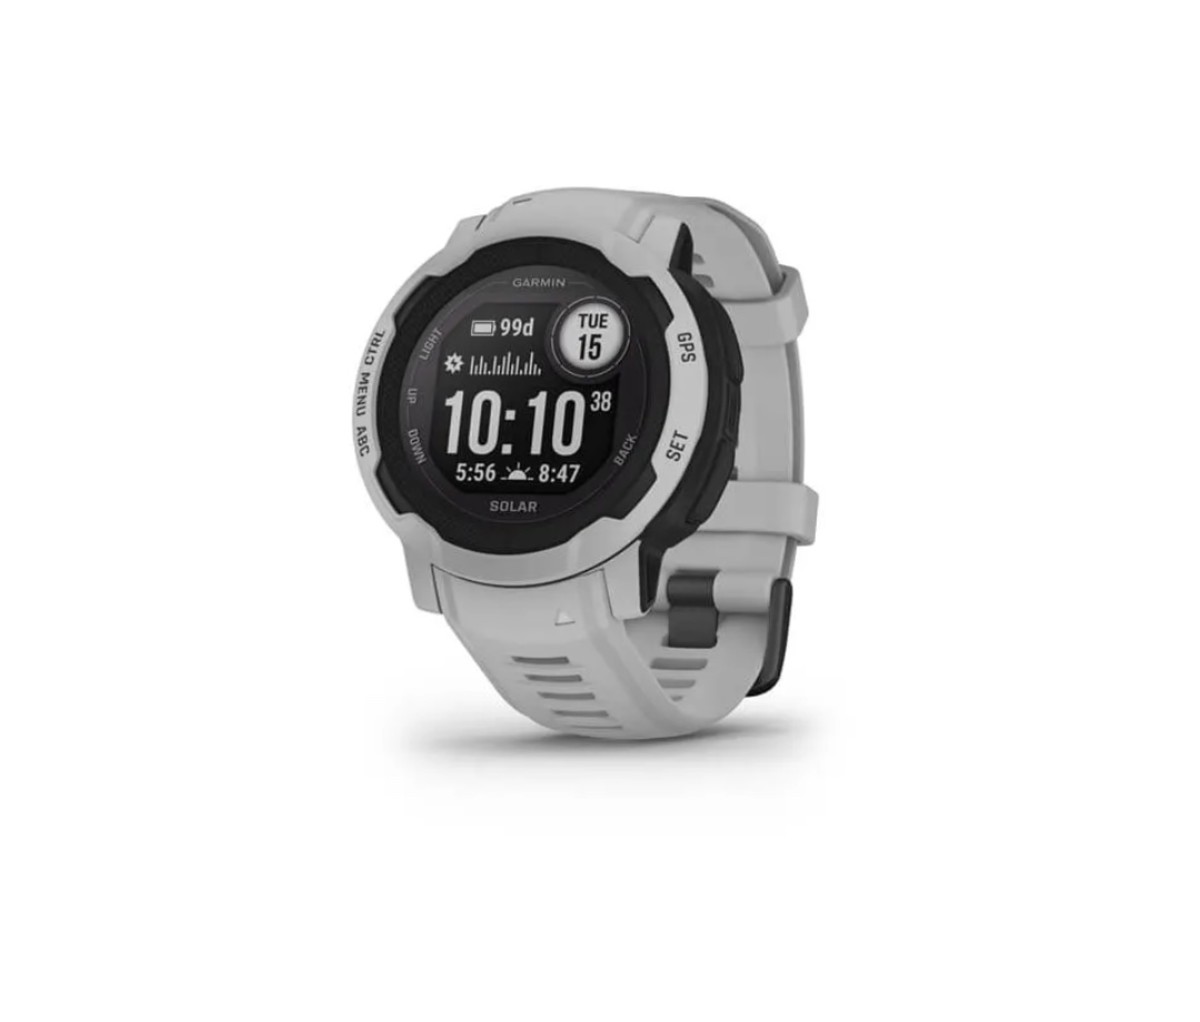 Track your progress in the woods with the Garmin Instinct 2 smartwatch.